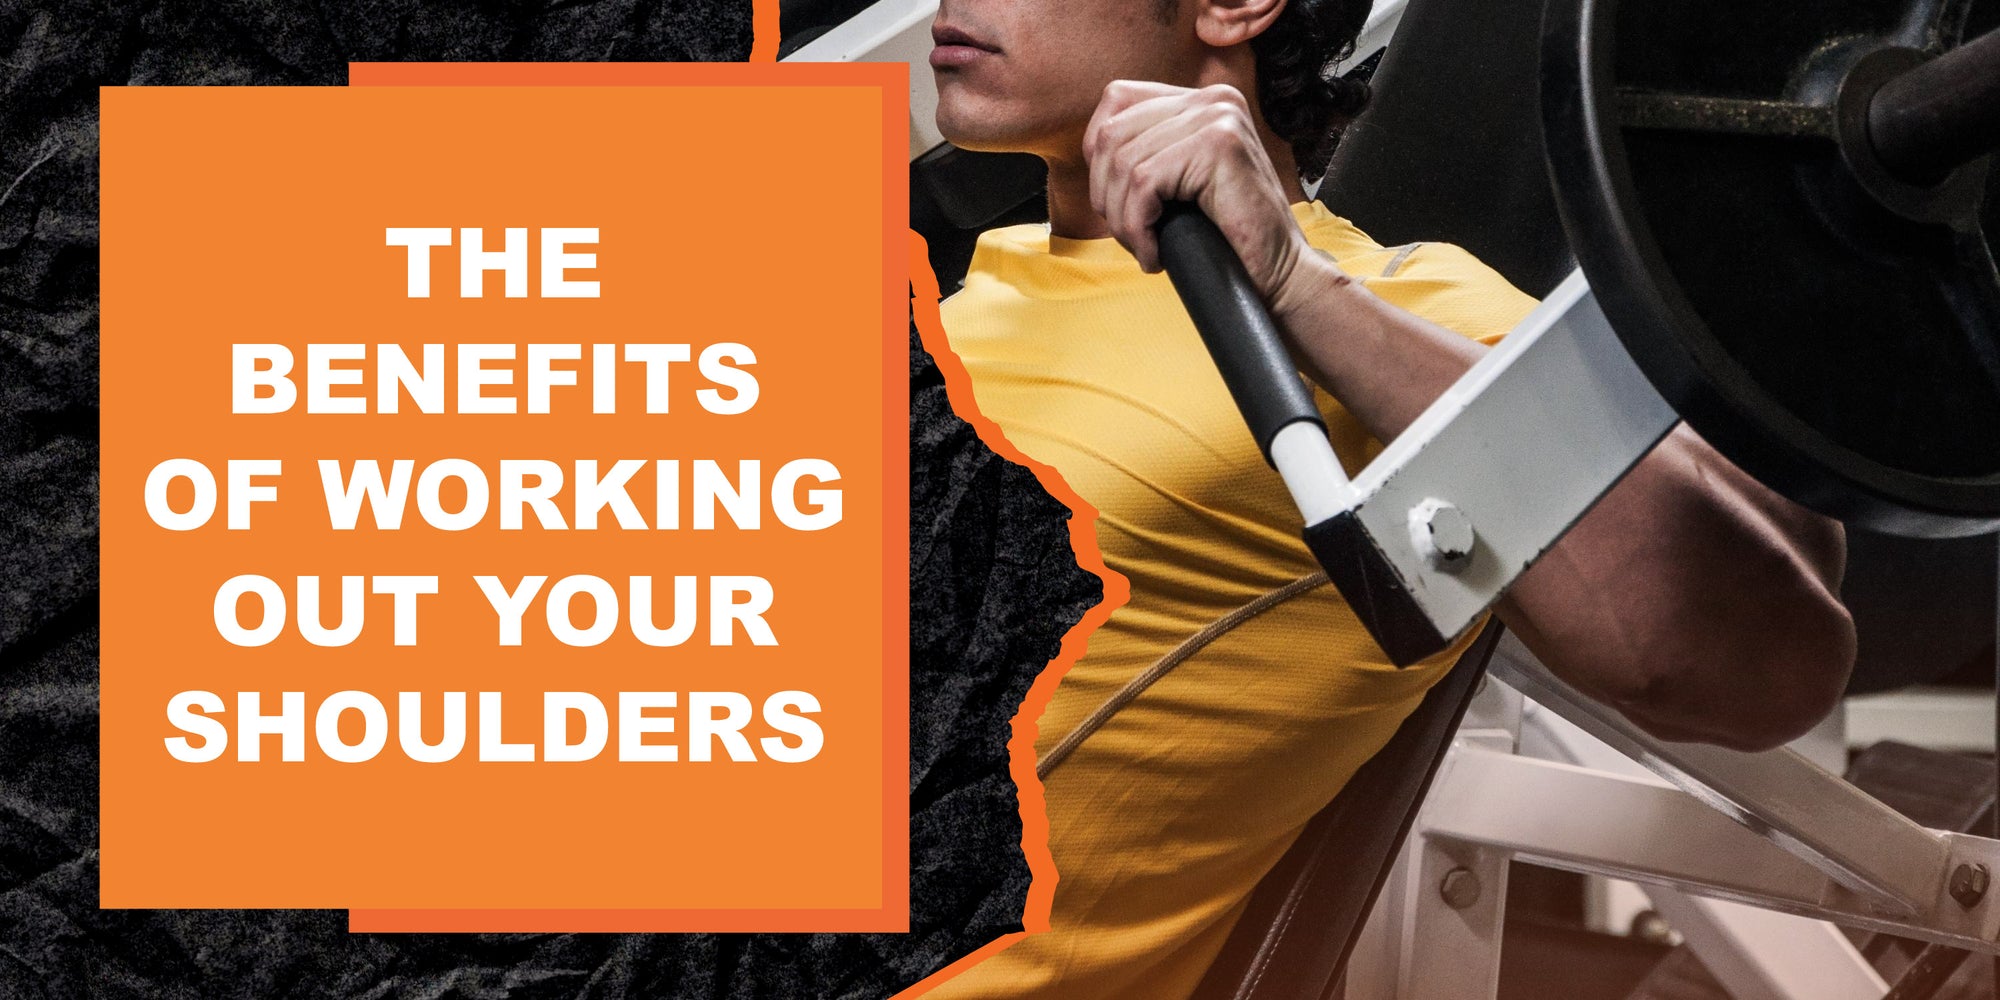 The Benefits of Working Out Your Shoulders